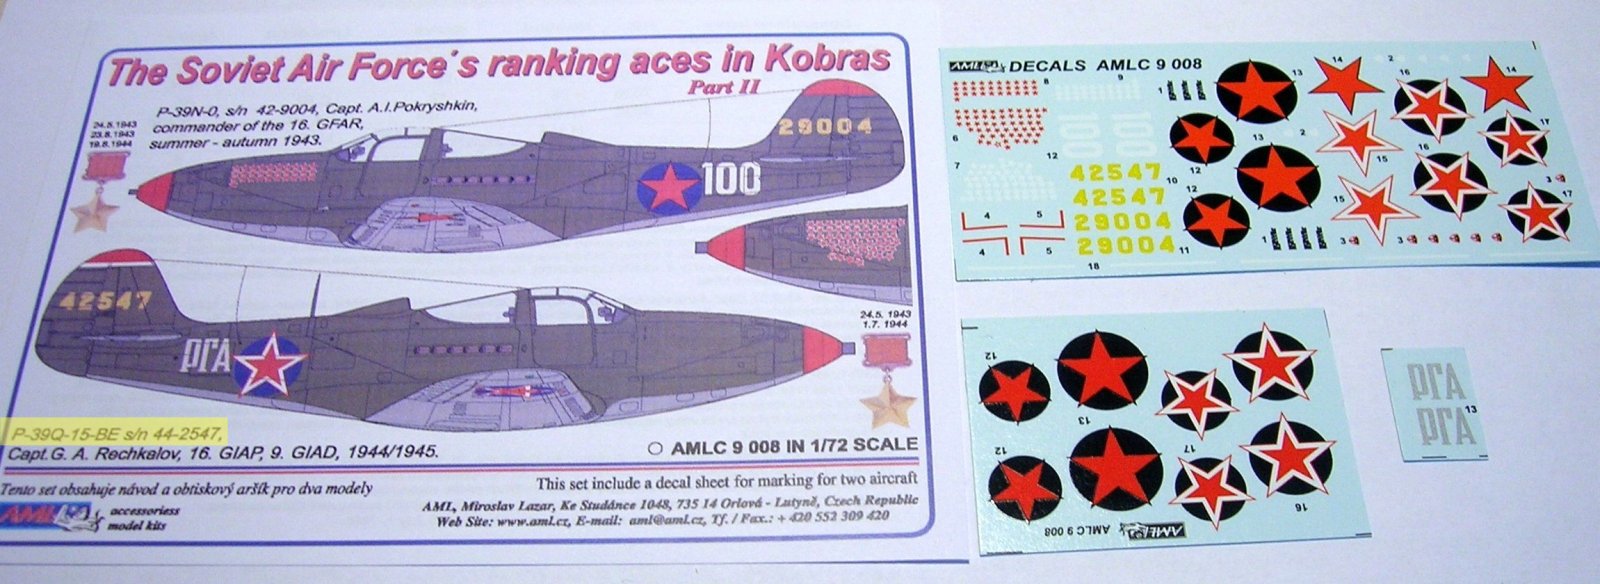 [Arma Hobby] 1/72 - Bell P-39N Airacobra  - Page 3 _decal13